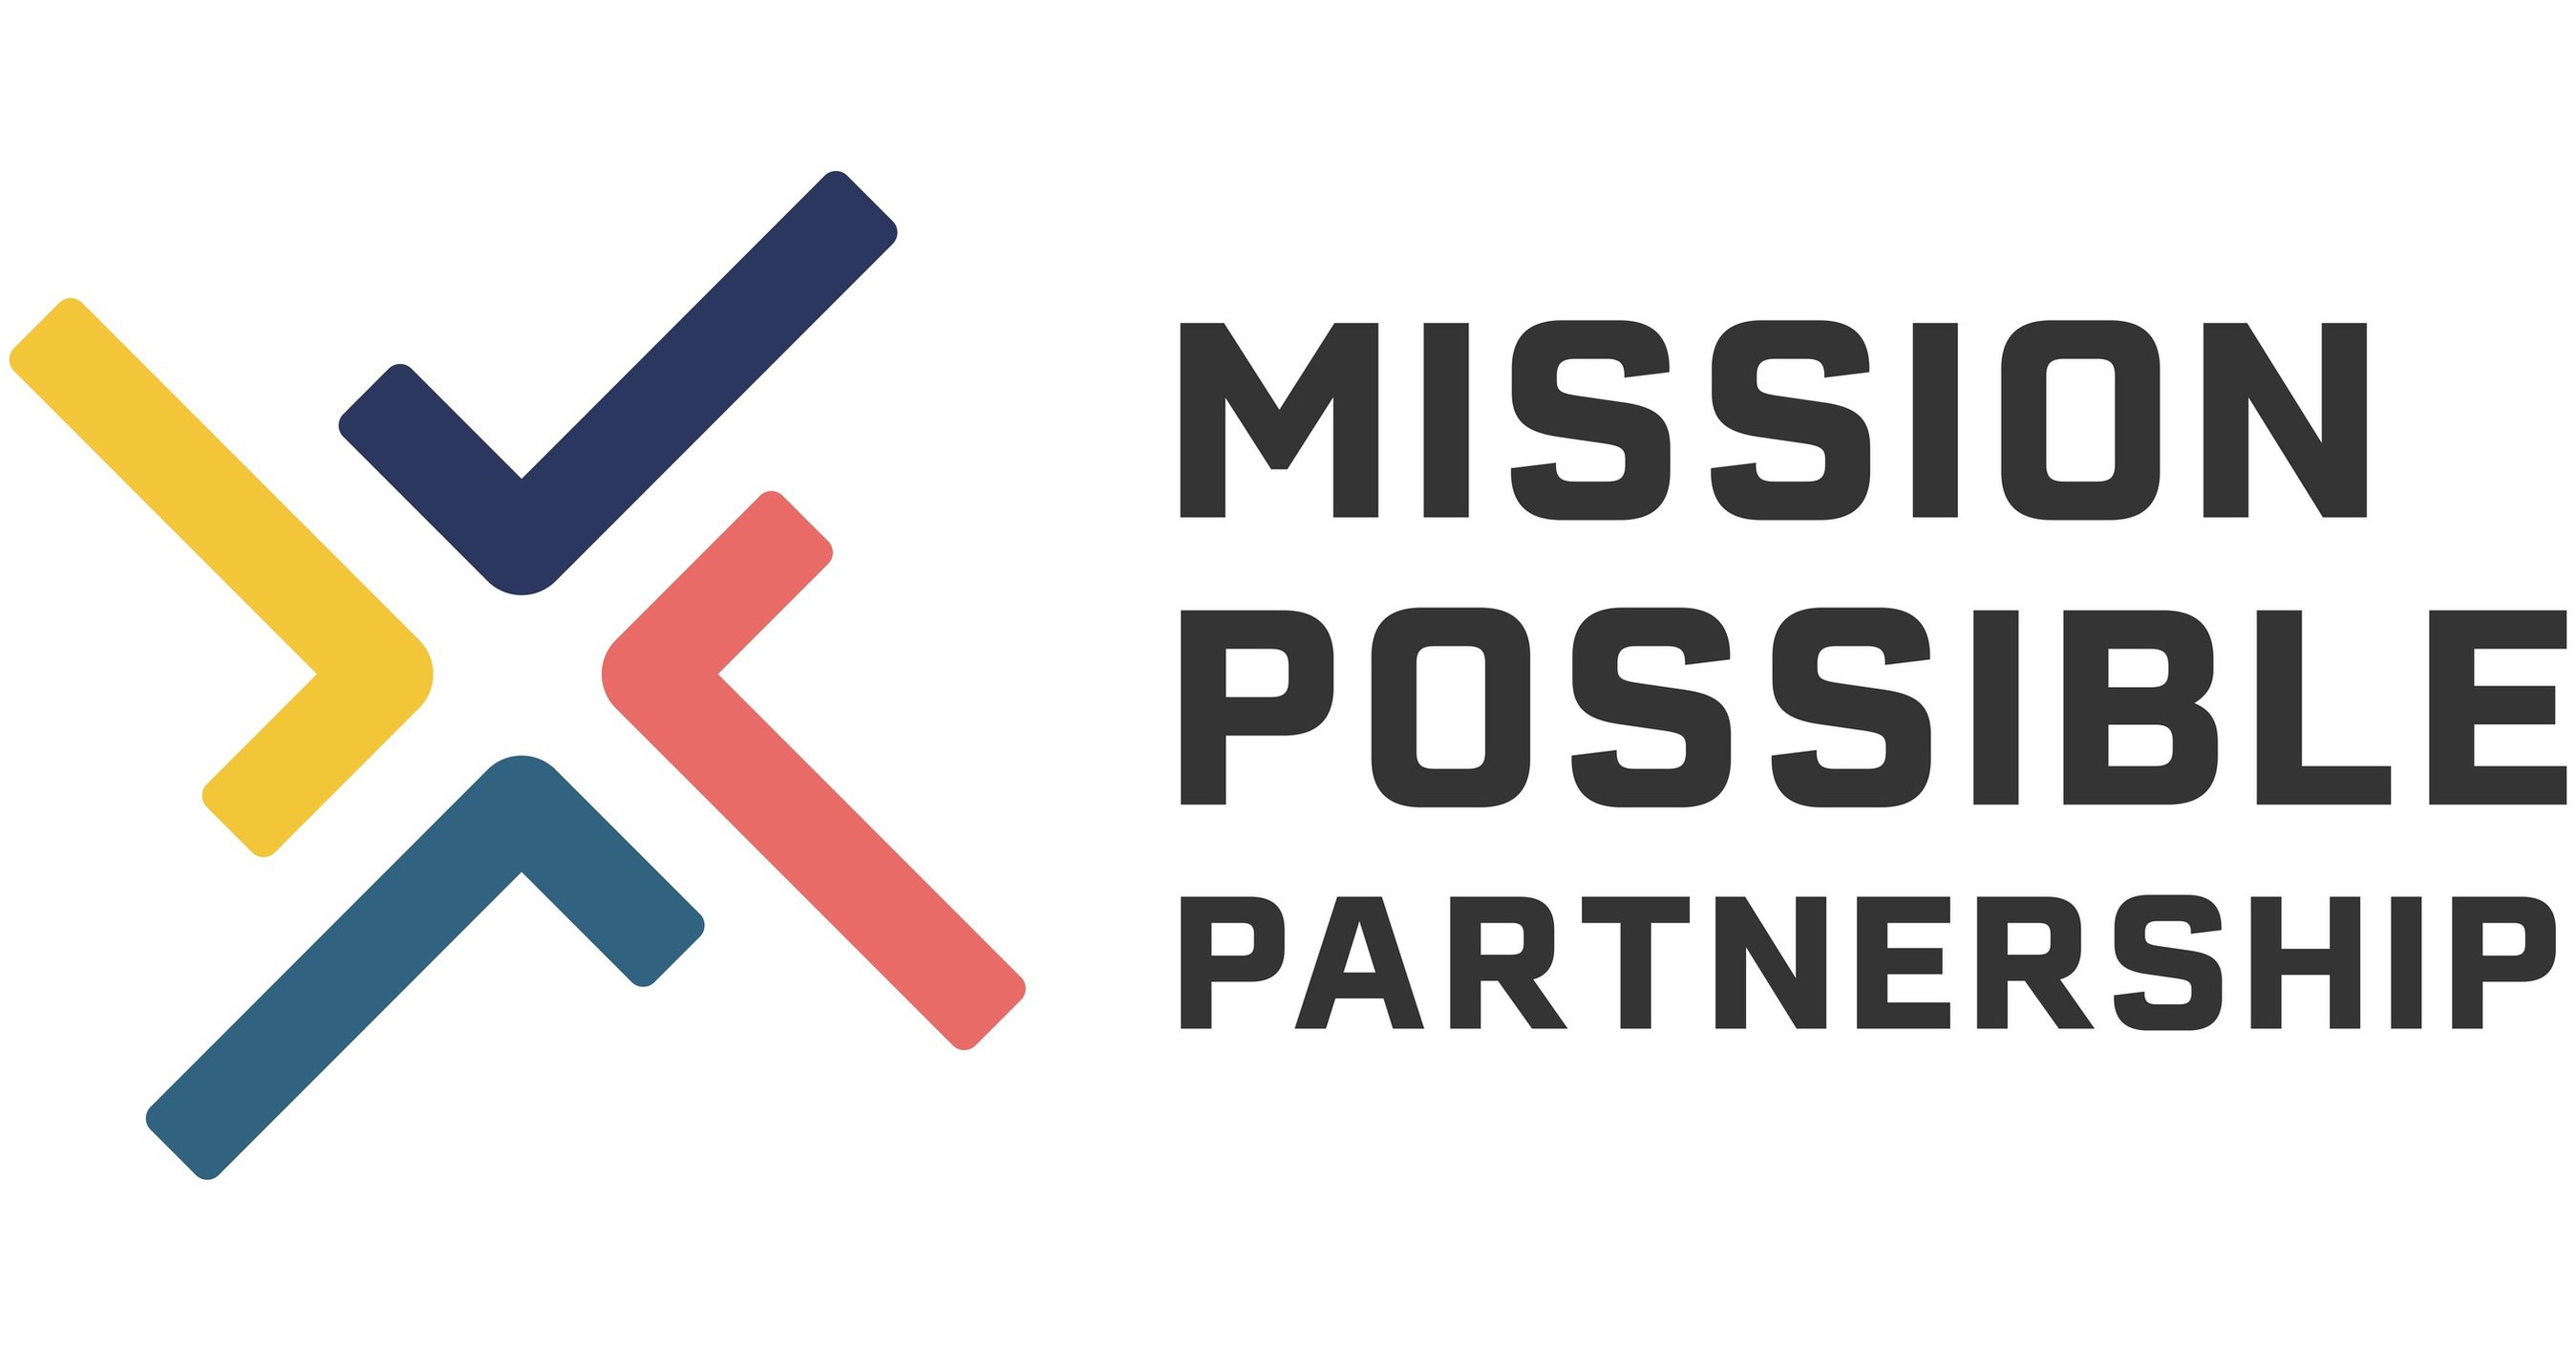 The Mission Possible Partnership Announces Its First Ever Ceo Matt Rogers To Scale Industry And Transport Decarbonization